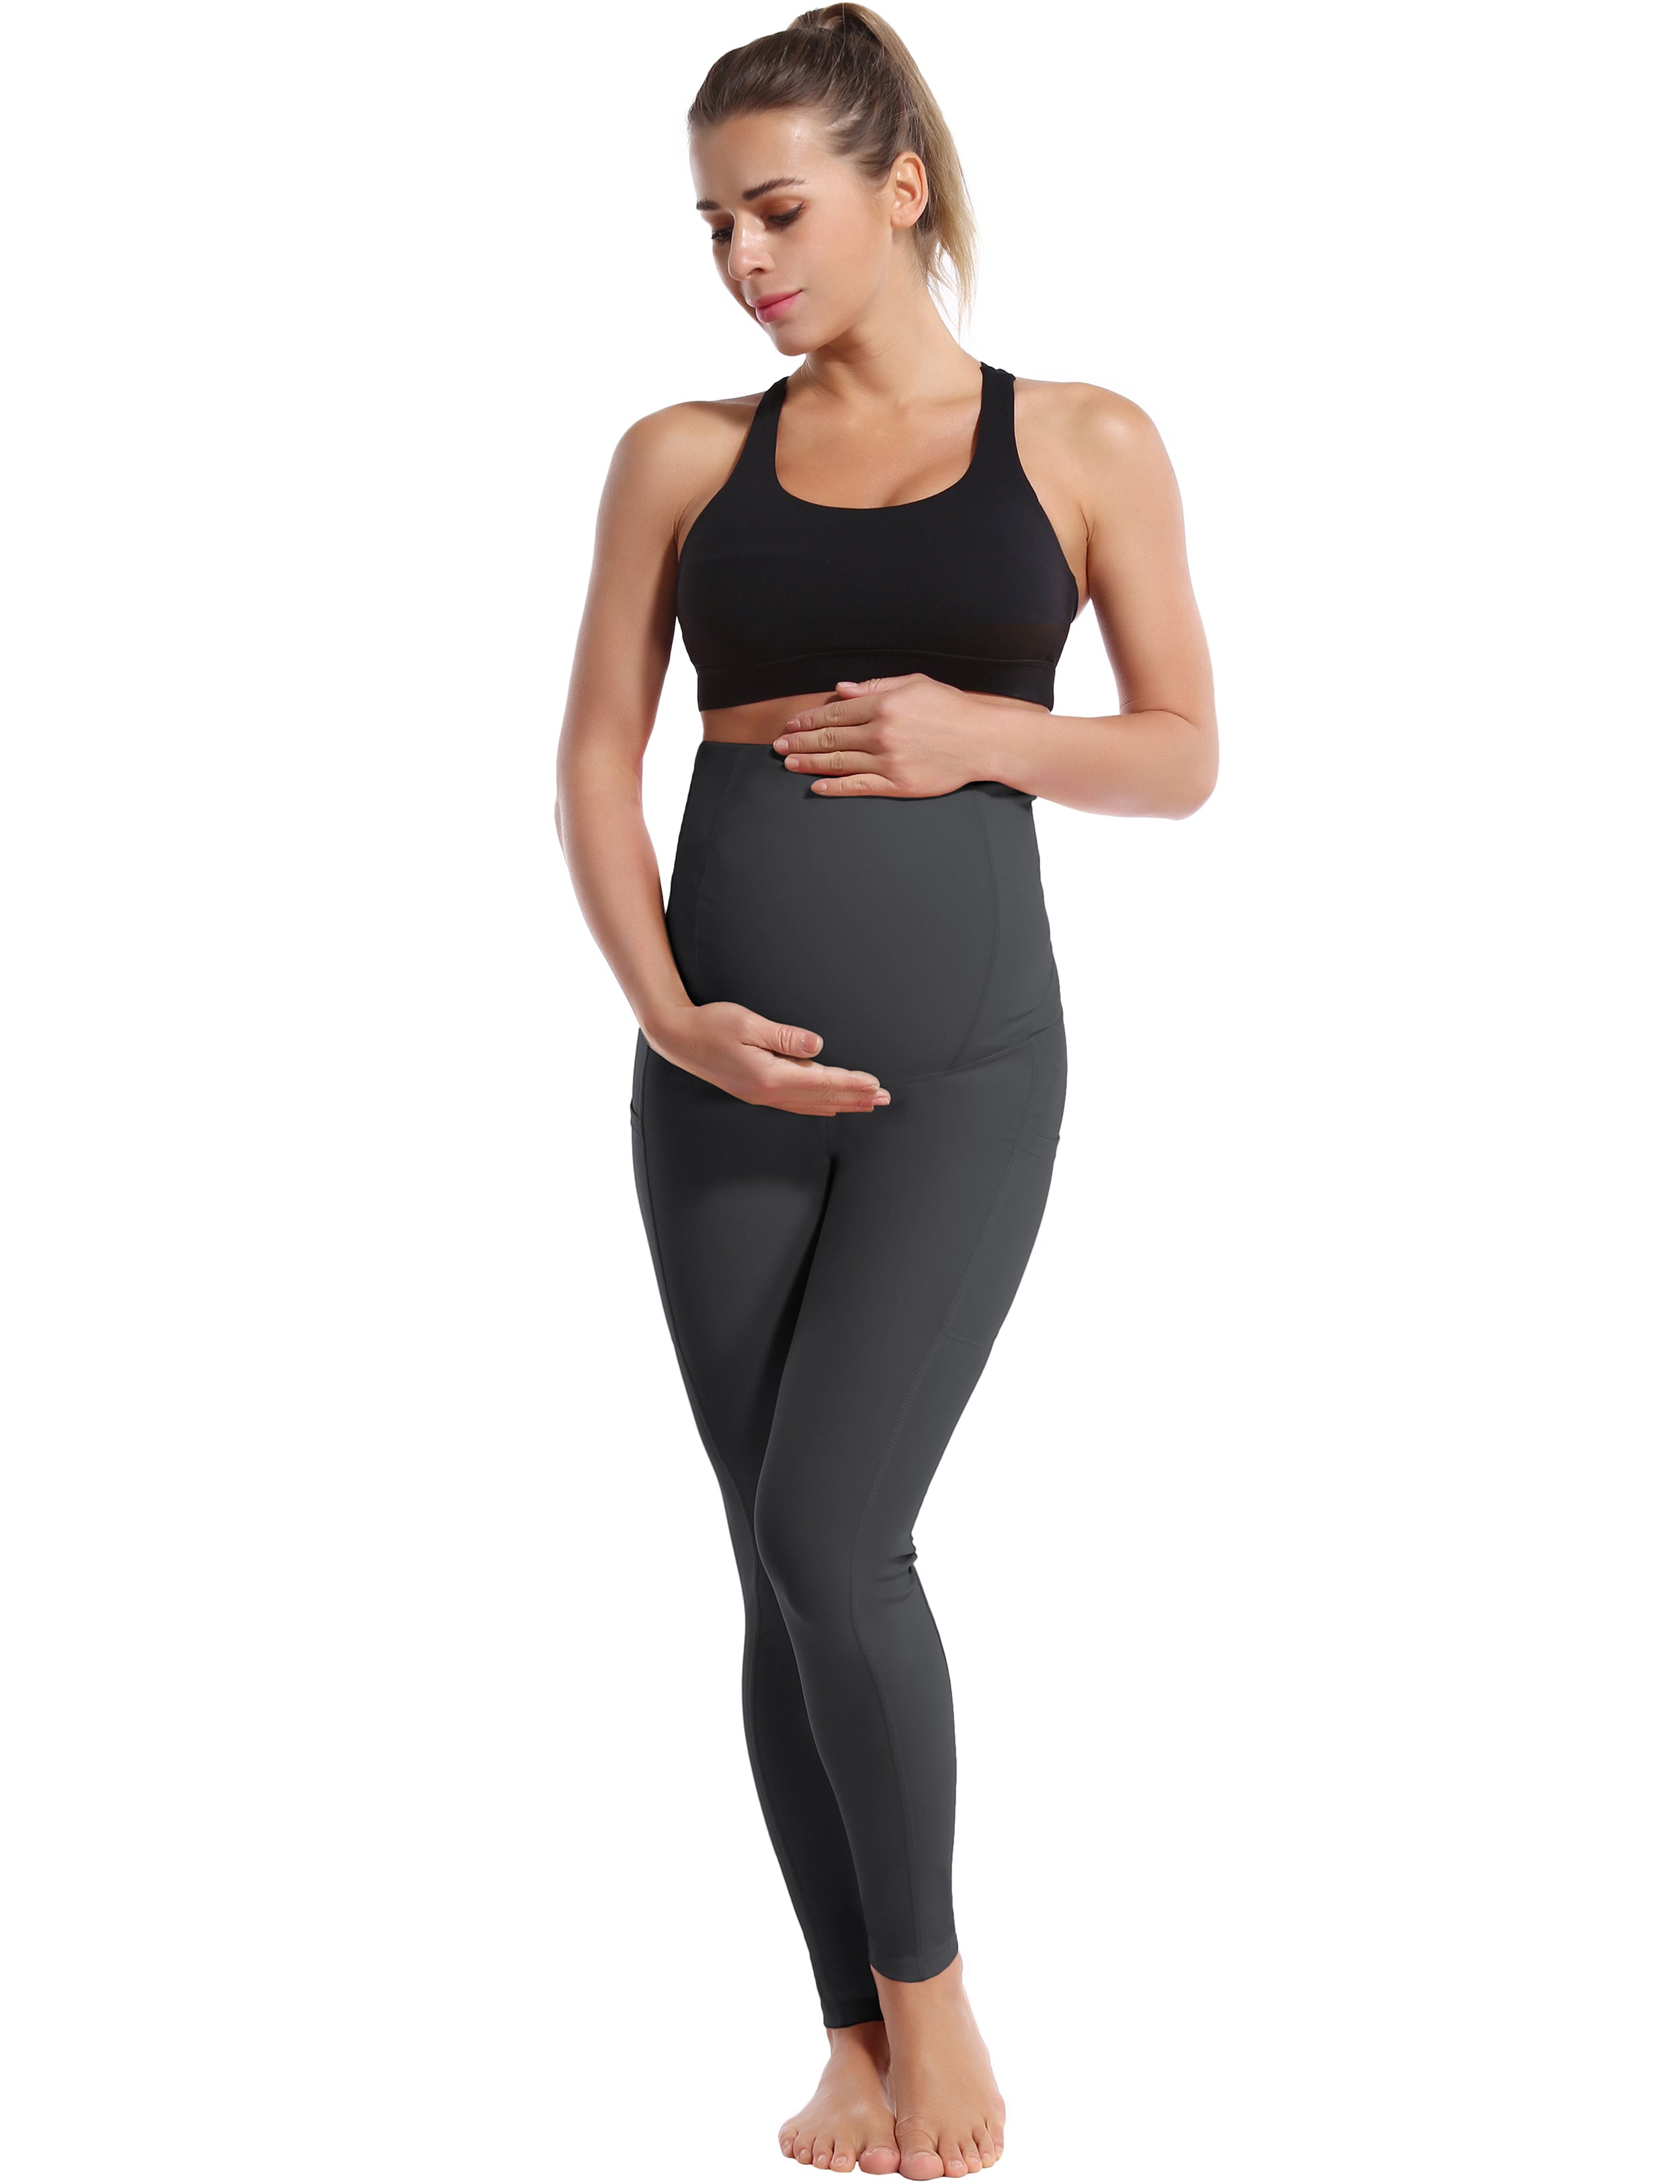 26" Side Pockets Maternity Golf Pants shadowcharcoal 87%Nylon/13%Spandex Softest-ever fabric High elasticity 4-way stretch Fabric doesn't attract lint easily No see-through Moisture-wicking Machine wash